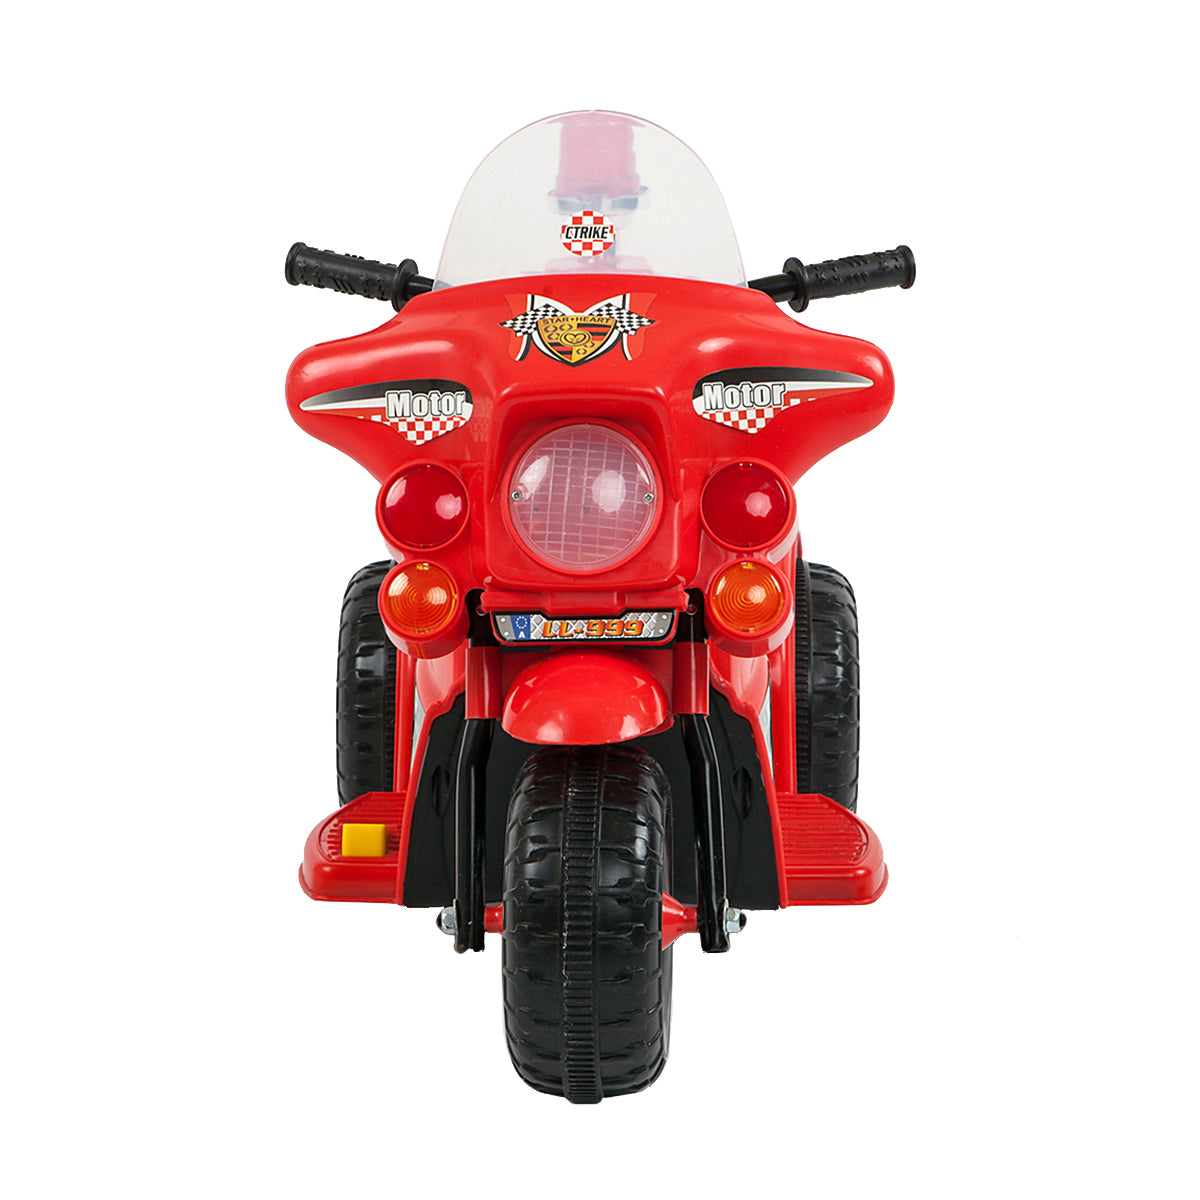 Front view of the Children's Electric Ride-on Motorcycle